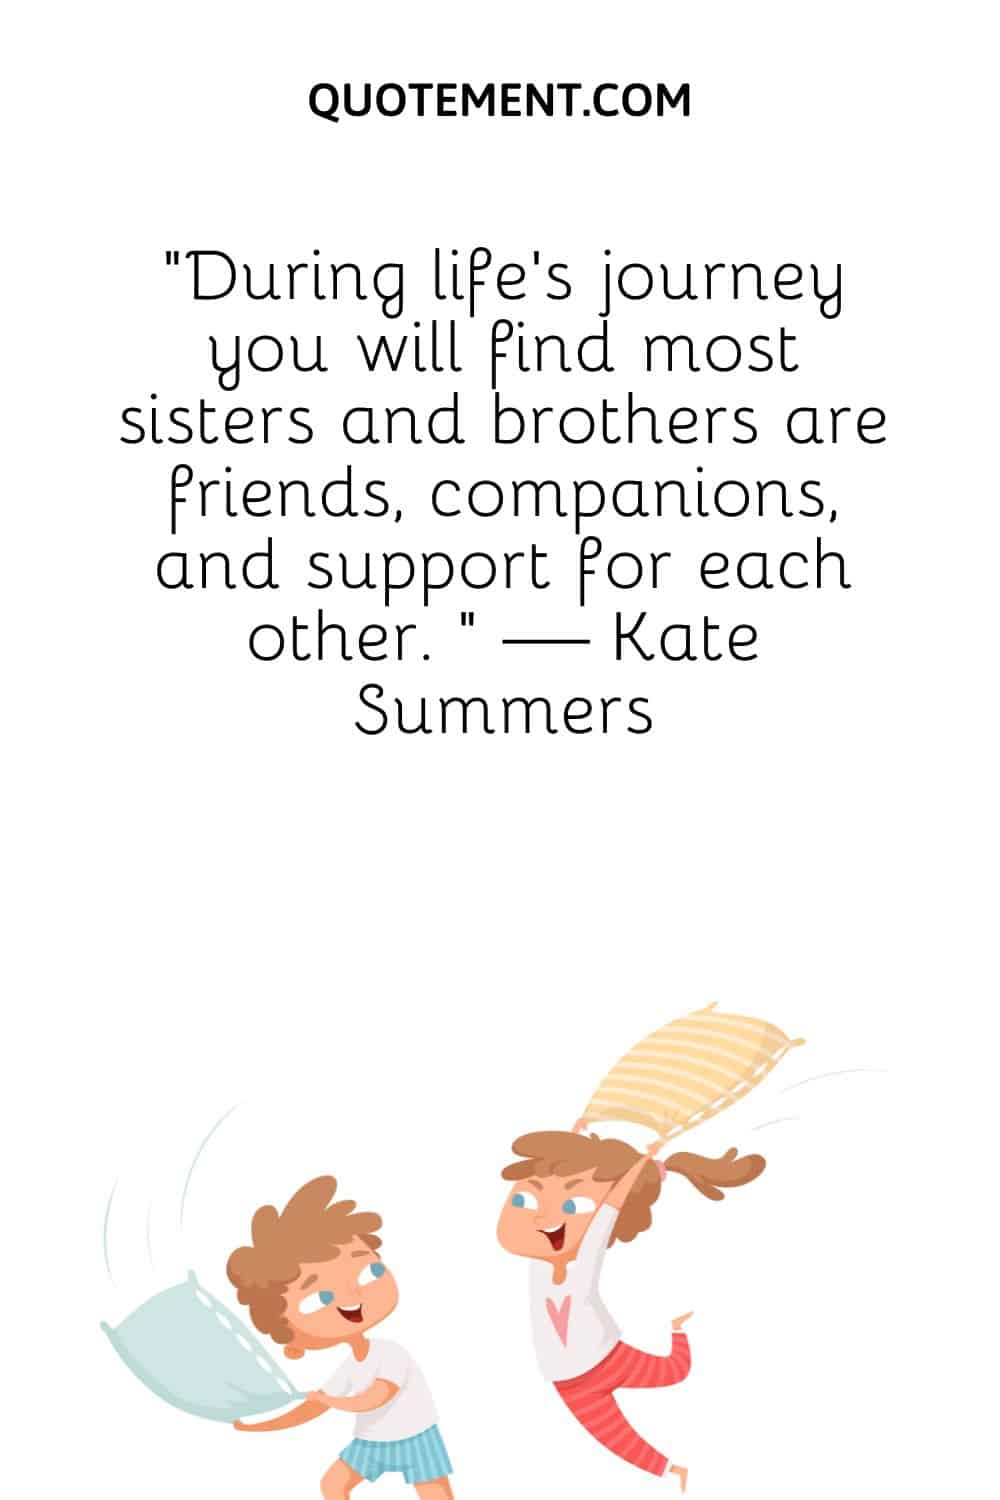 During life’s journey you will find most sisters and brothers are friends, companions, and support for each other